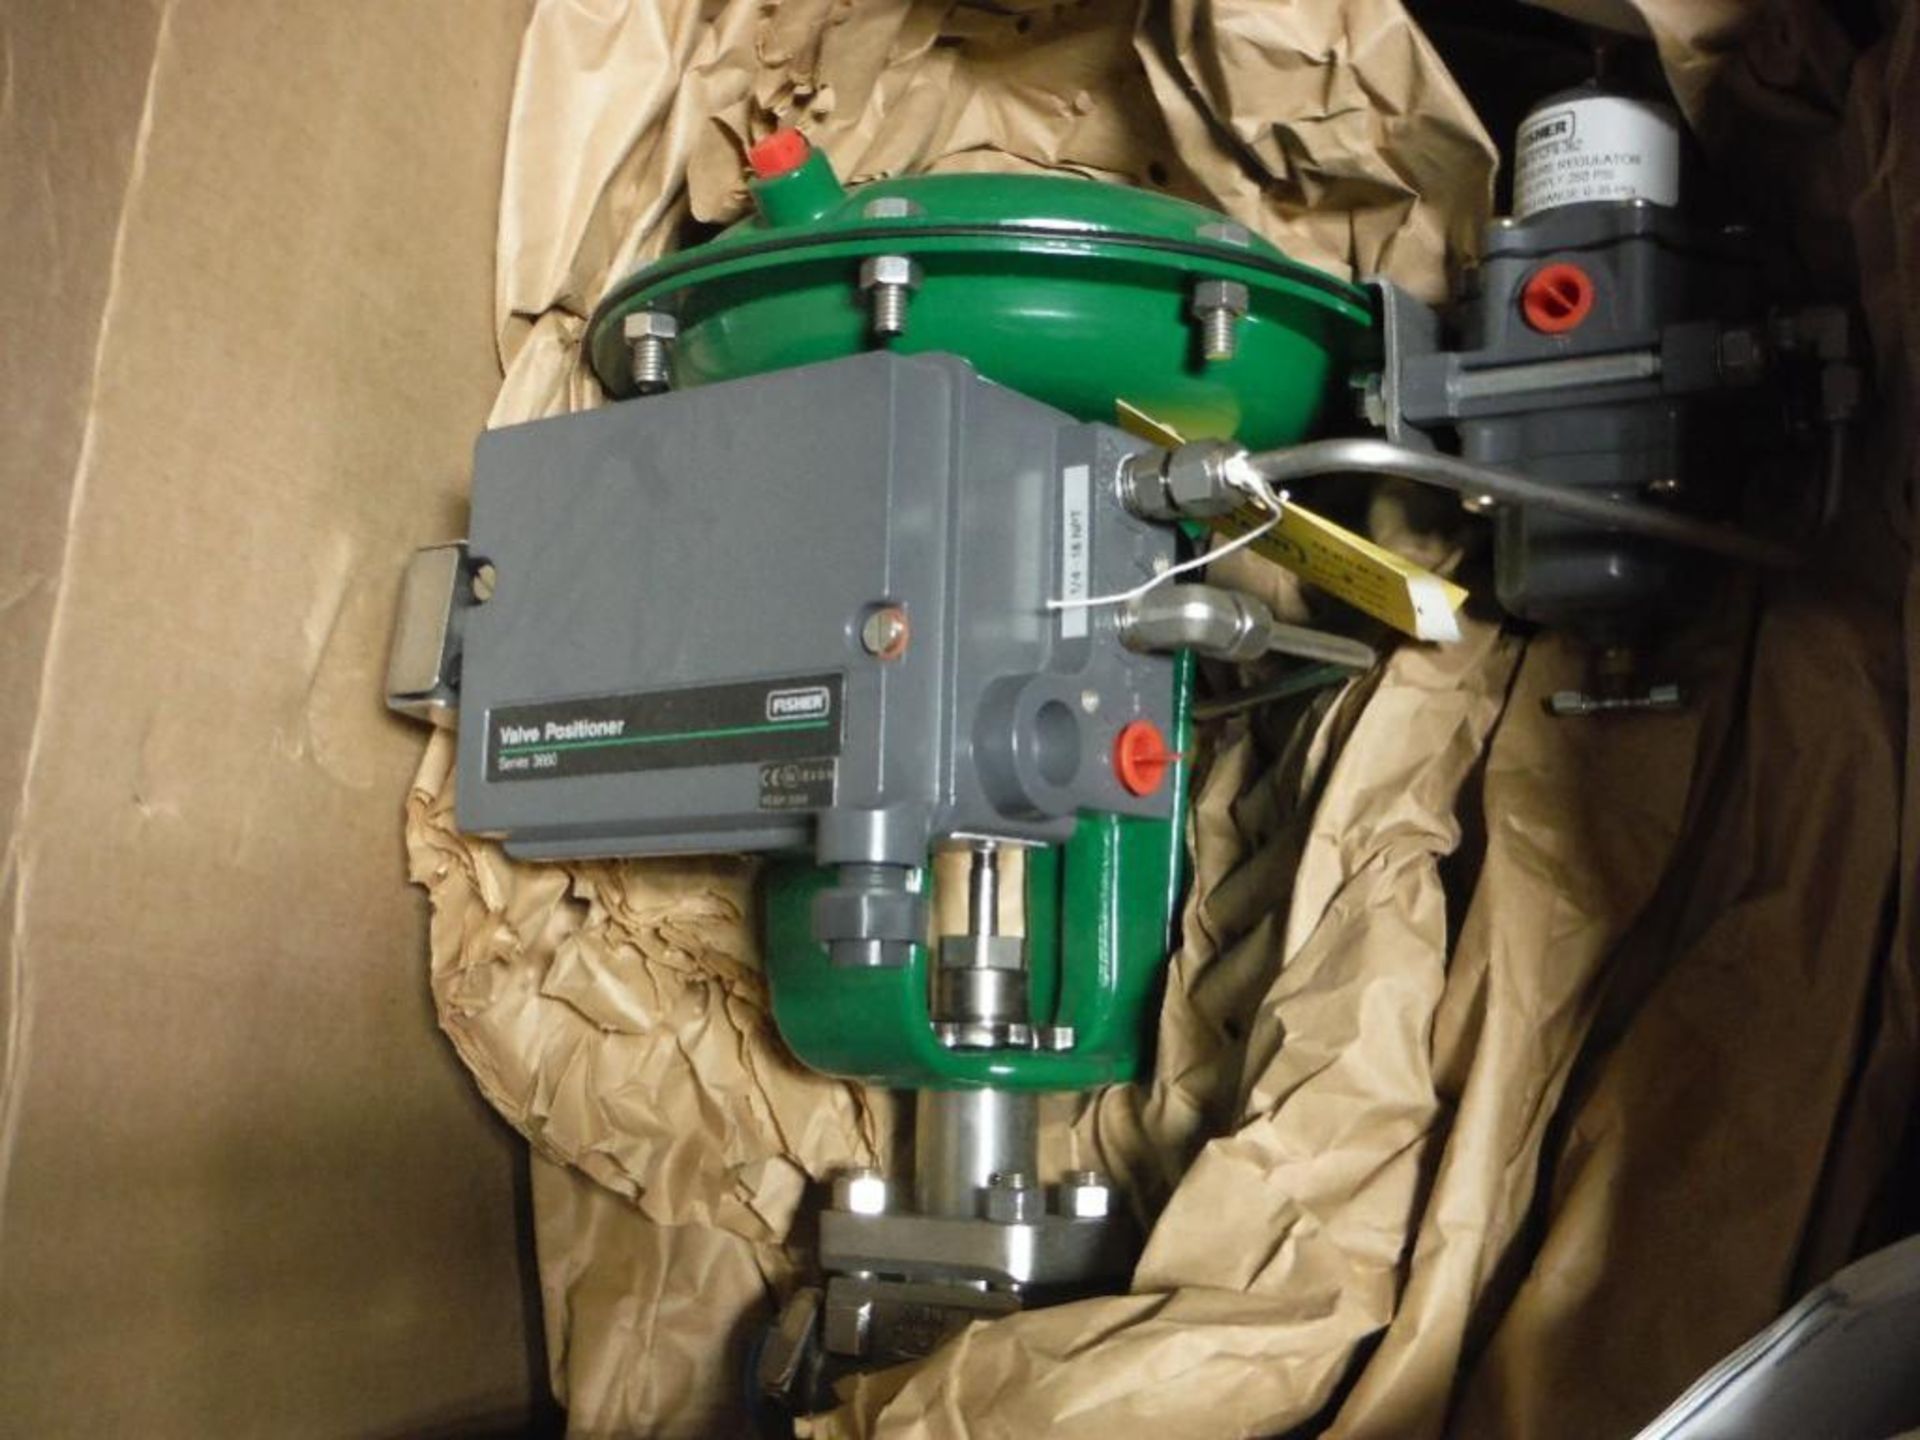 Emerson 1 in. valve with positioner, new in box. - RIGGING FEE FOR DOMESTIC TRANSPORT $25